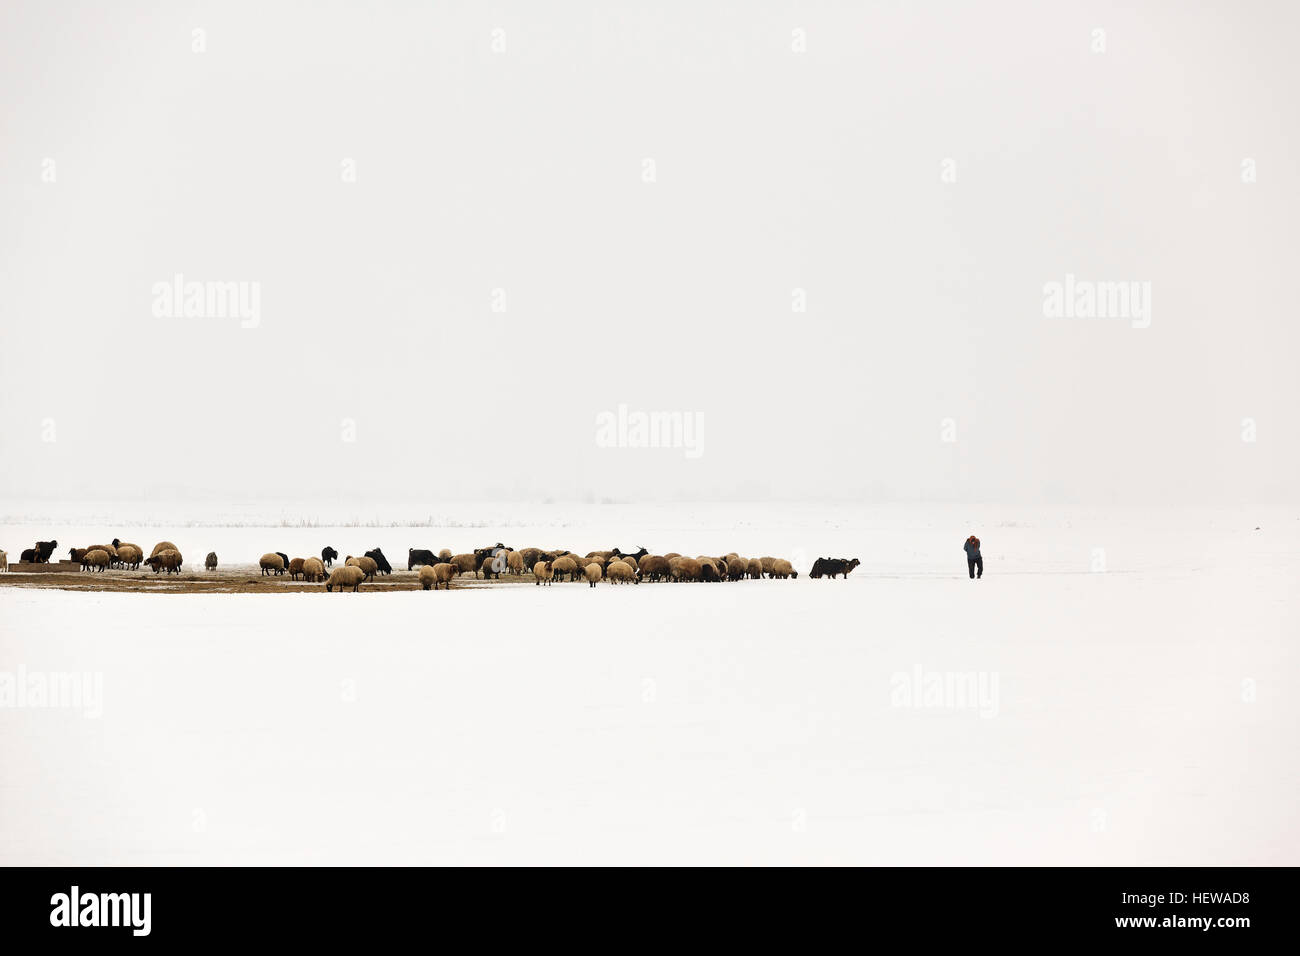 One shepherd feeds the herd of sheep in foggy and snowy environment in winter time Stock Photo